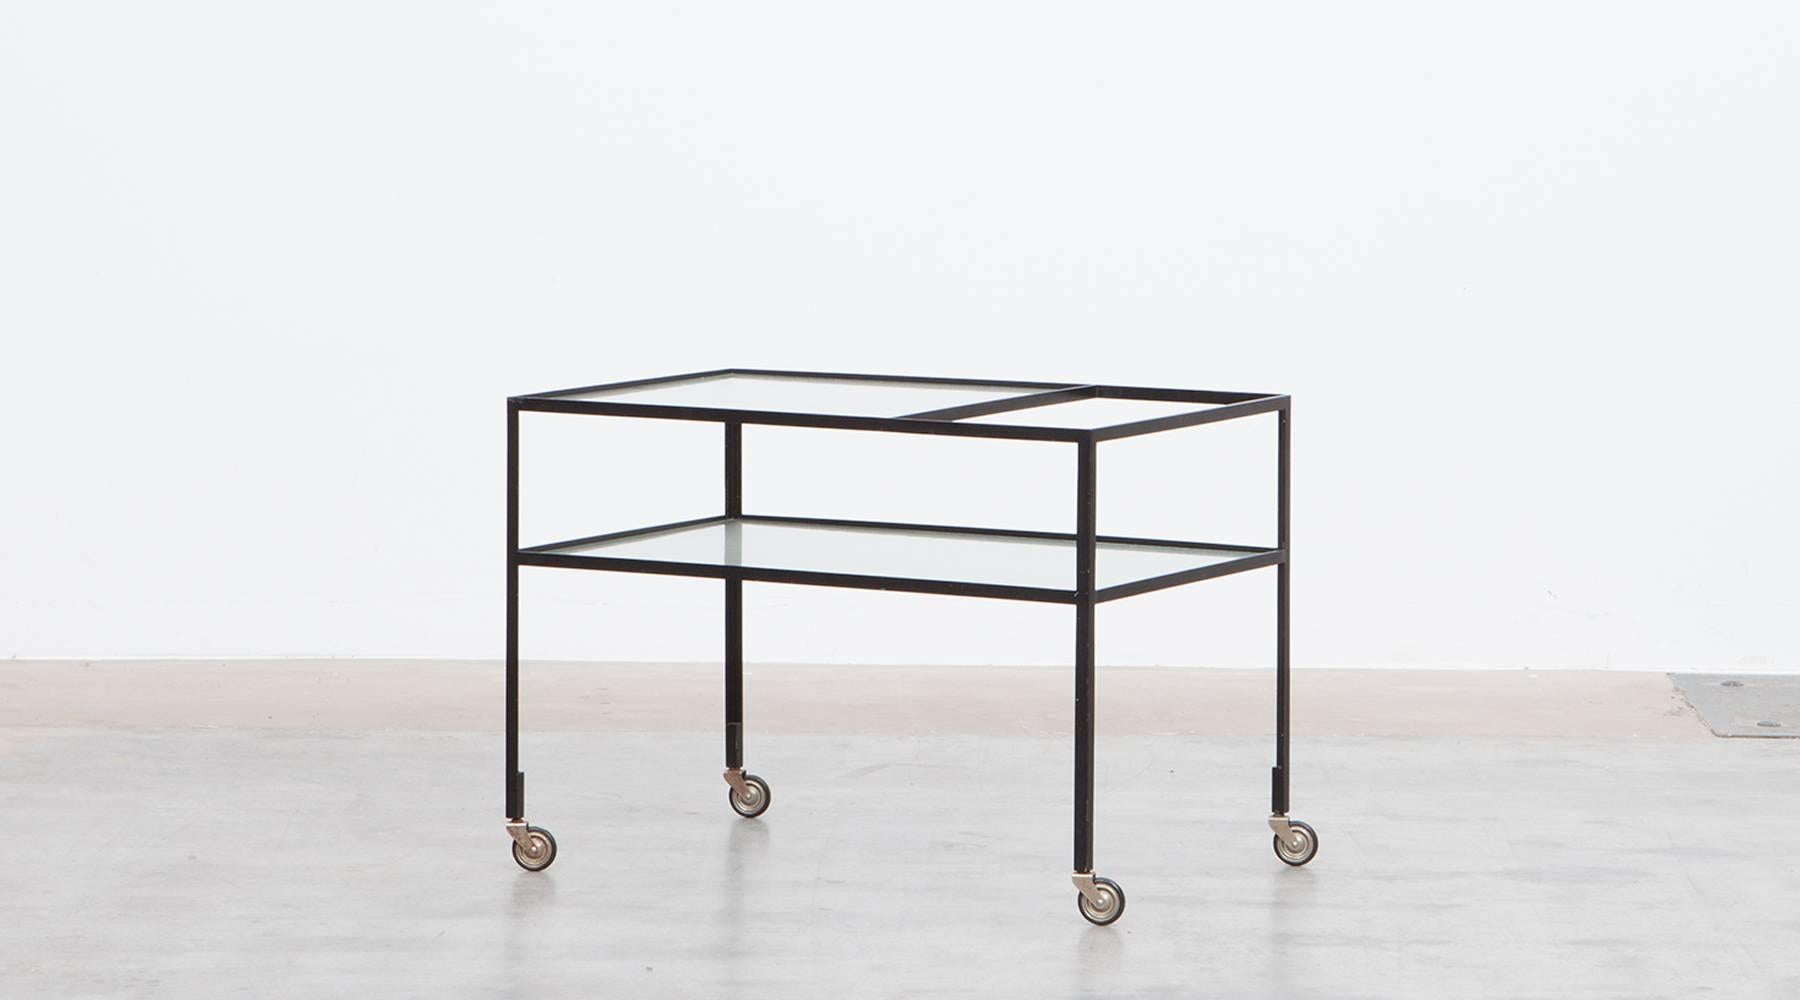 The Serving Cart in steel with original reeded glass plates is designed by German architect Herbert Hirche. The slender and reduced steel frame holds the very well-preserved original glass plate. Manufactured by Christian Holzäpfel KG. 

Bauhaus